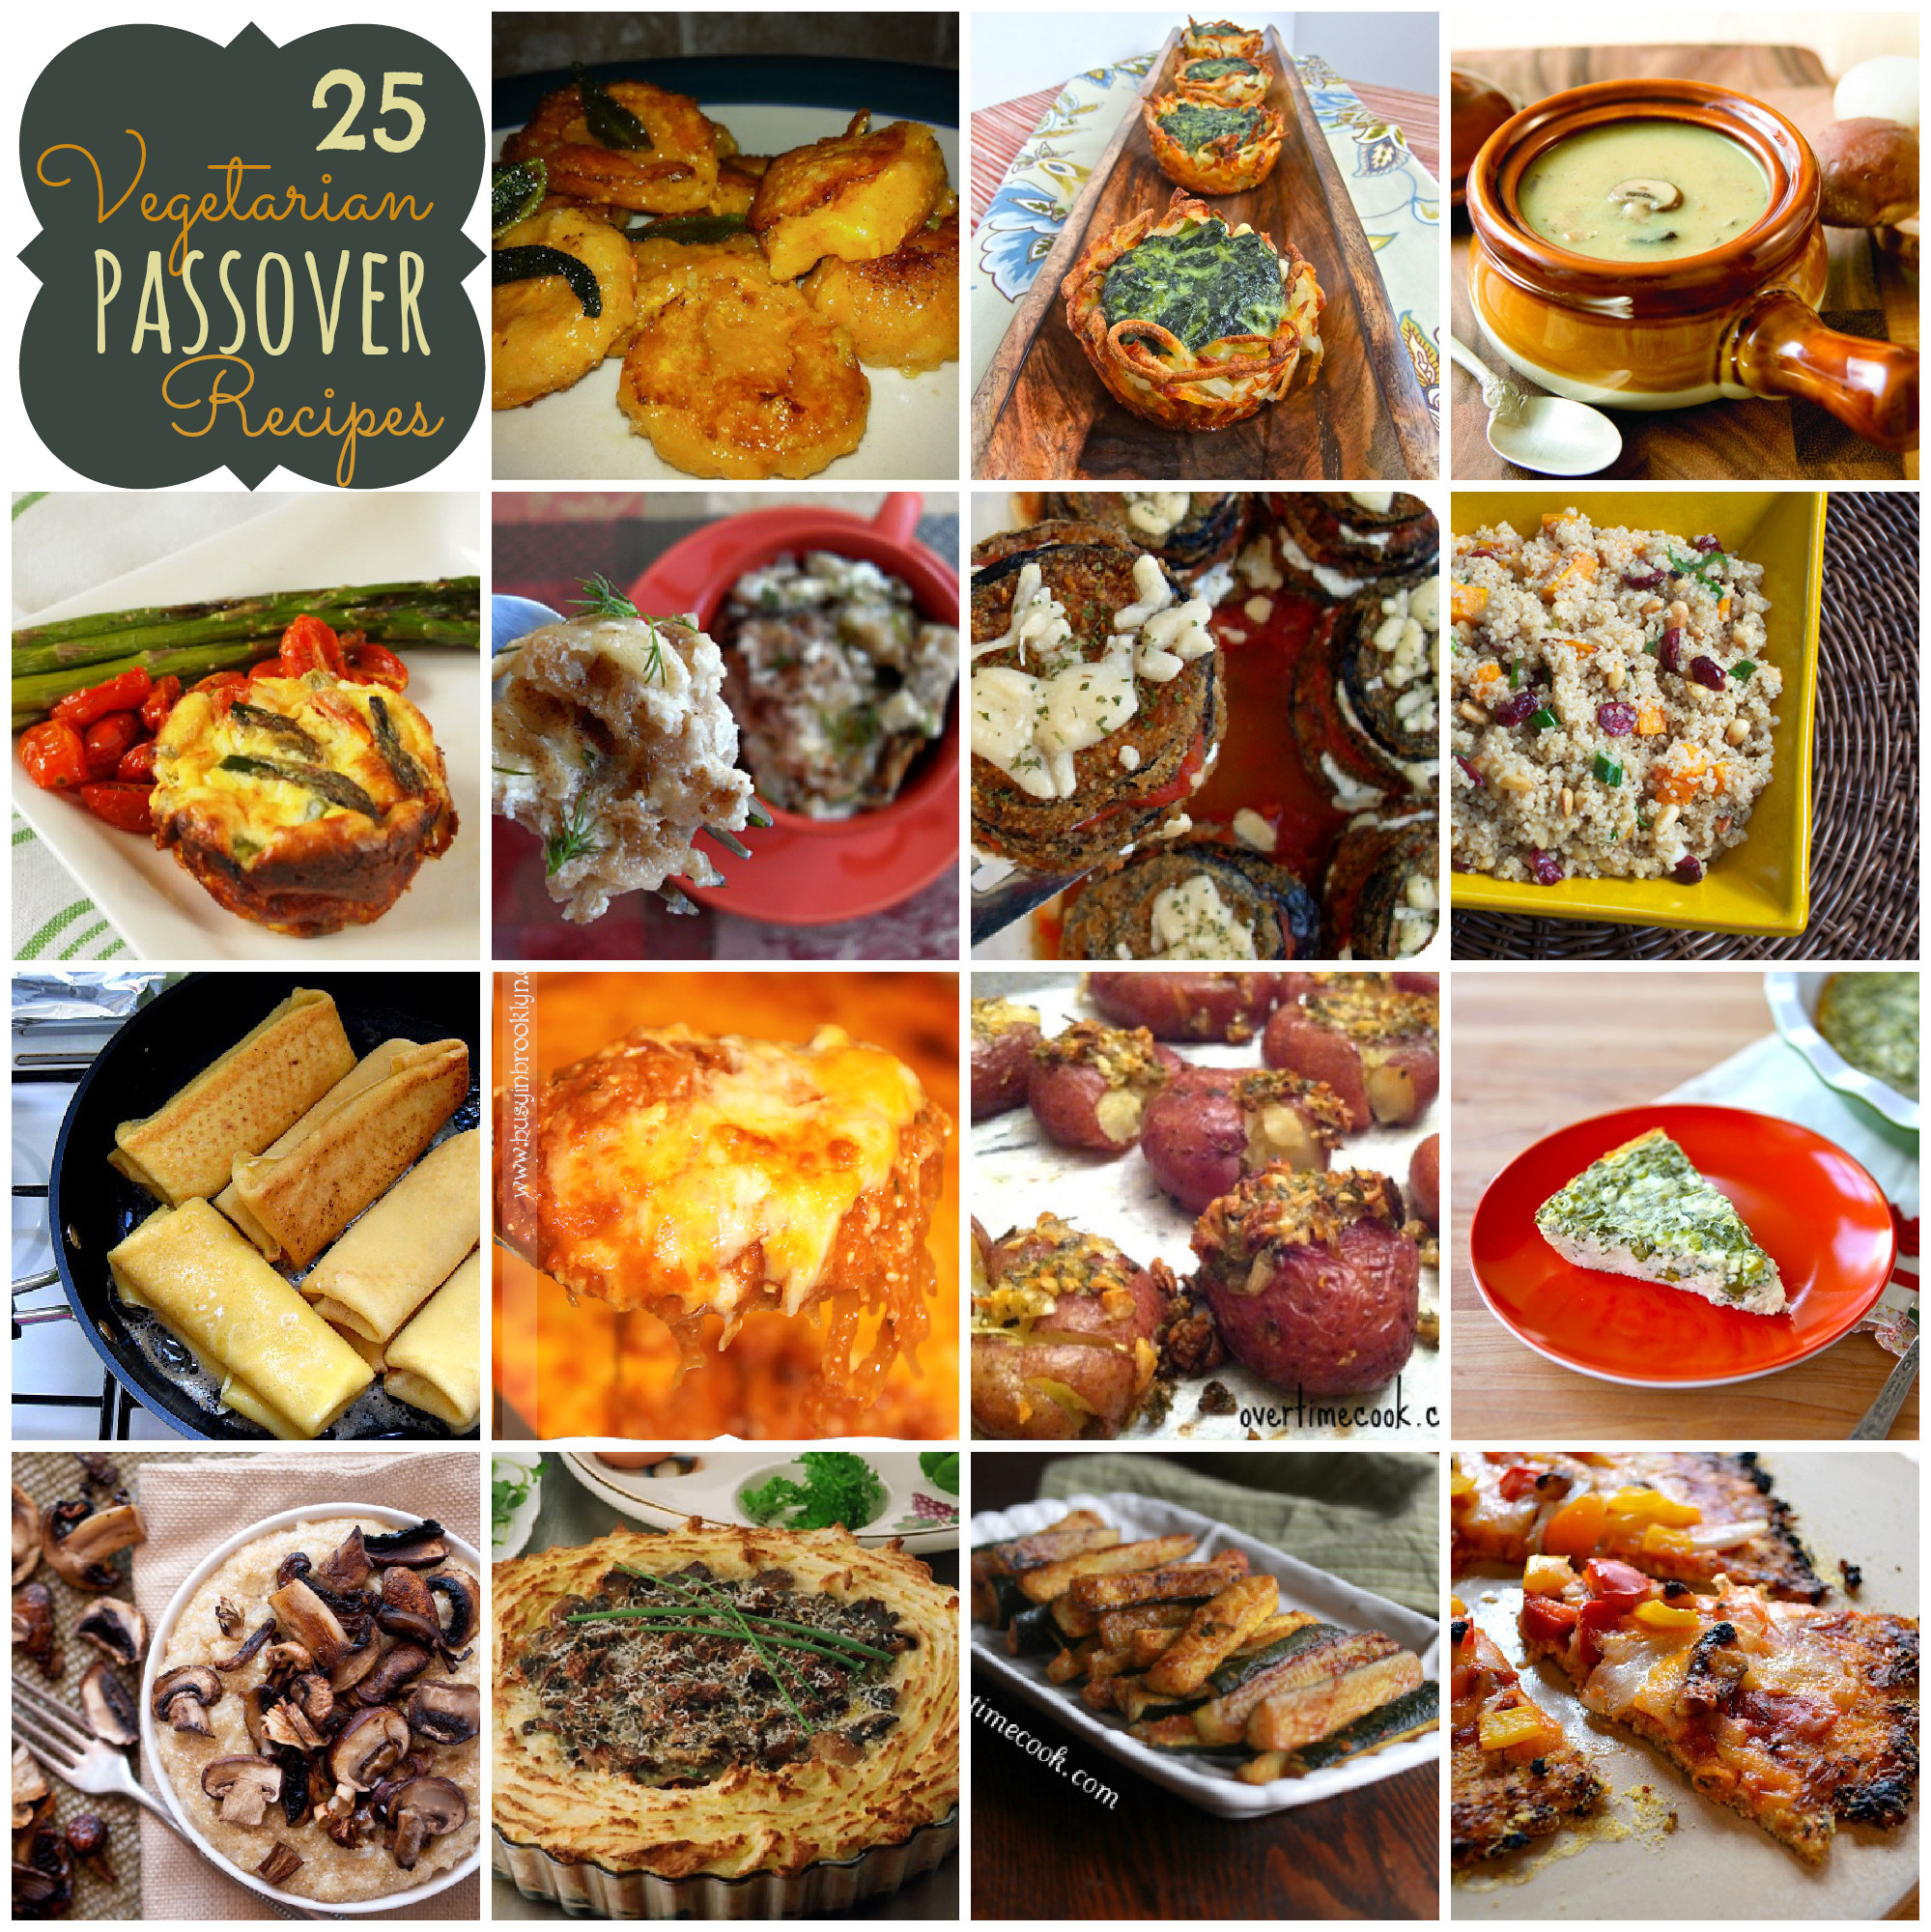 Kosher For Passover Food List
 25 Ve arian Passover Recipes